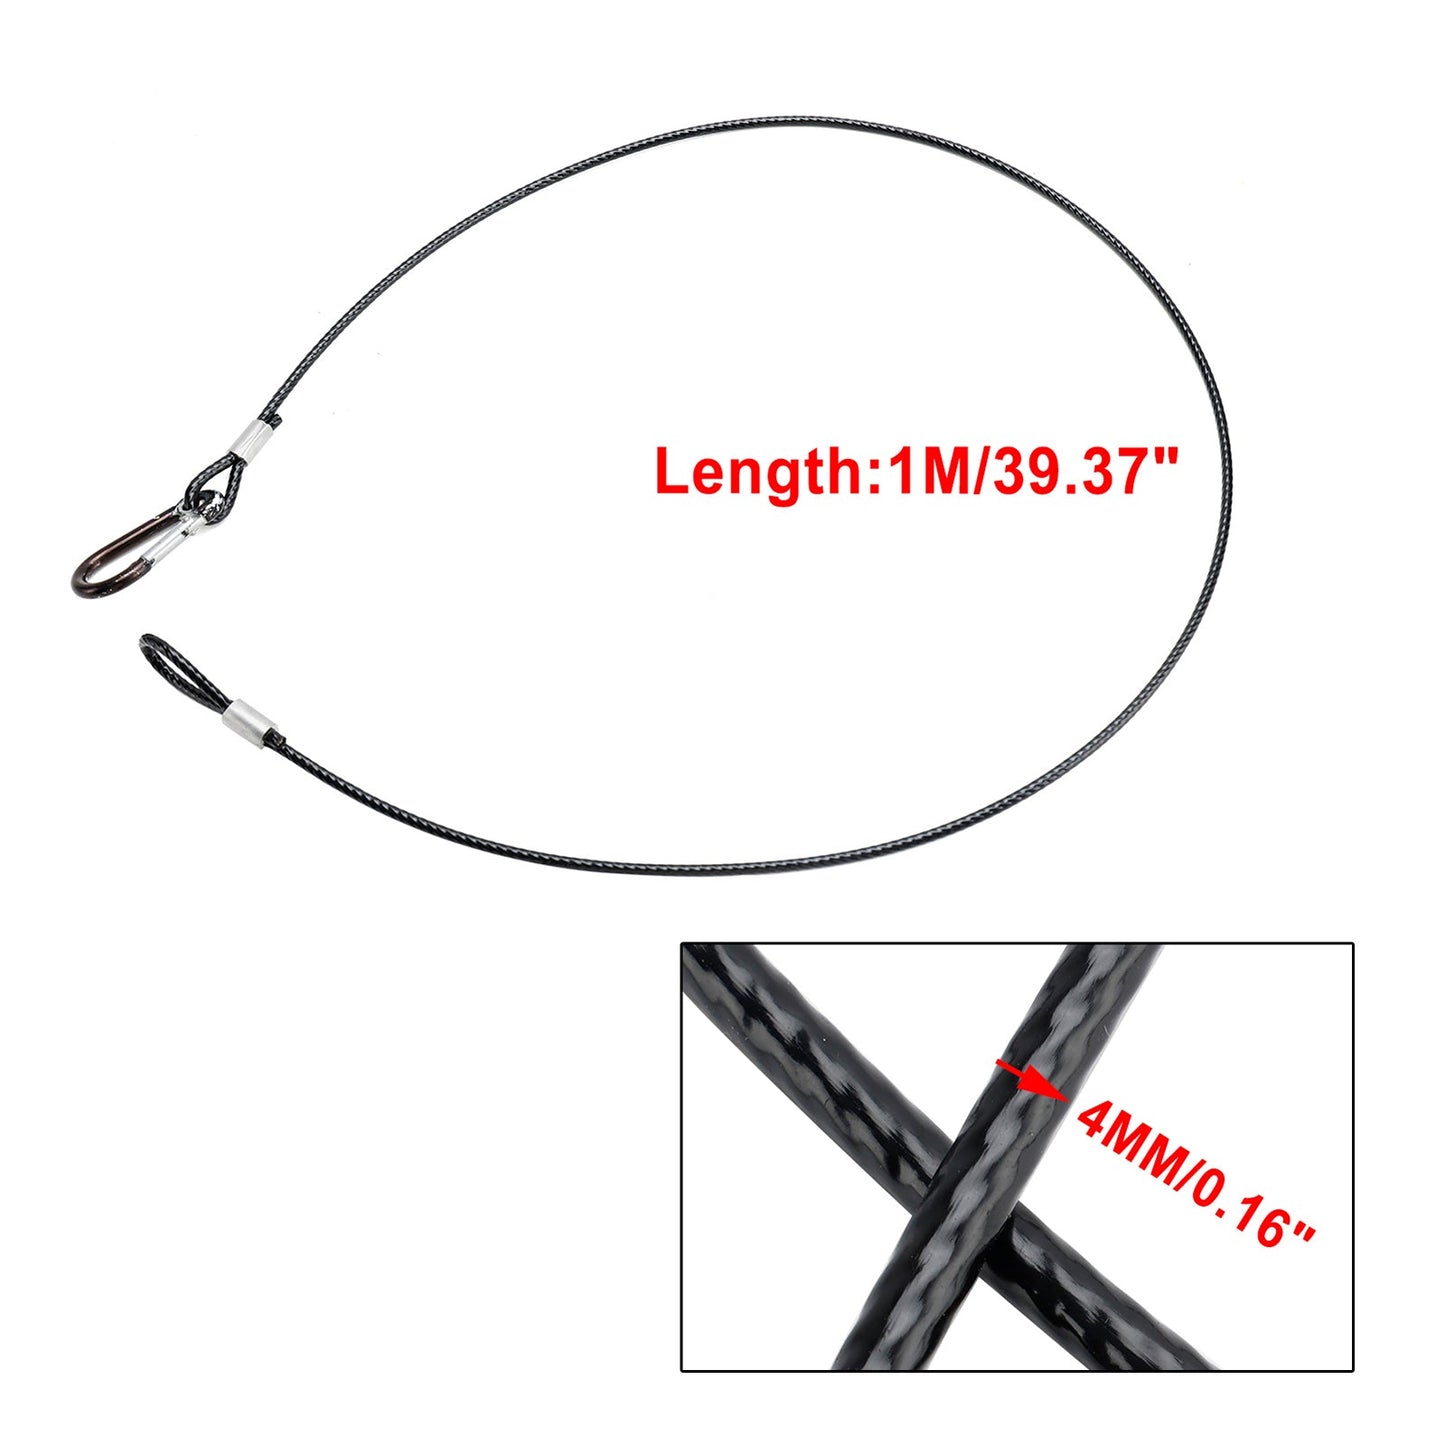 1/5/10Pcs 4MM Thick Steel Wire Safety Security Cable For Stage Clamp Beam Light